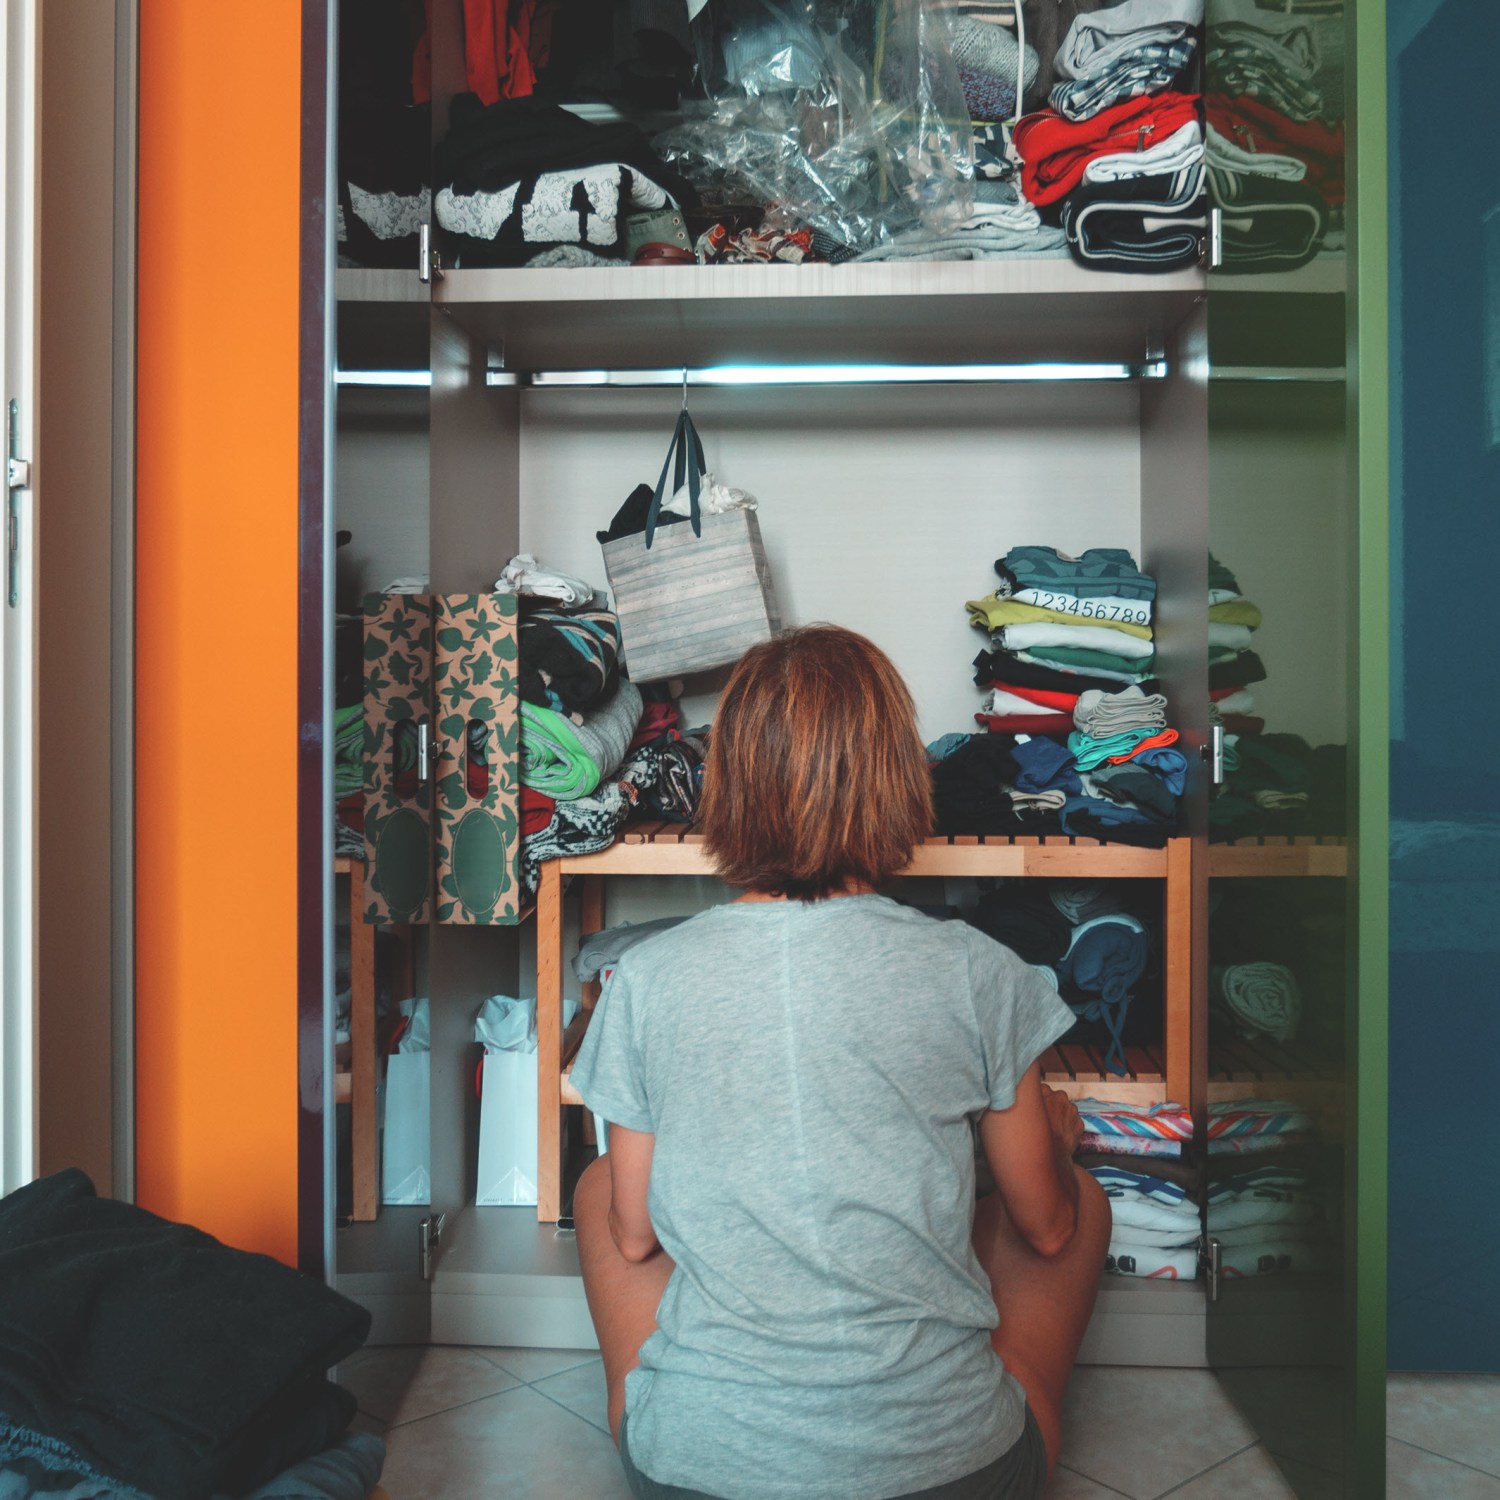 A woman sitting on the floor in front of a cluttered closet.